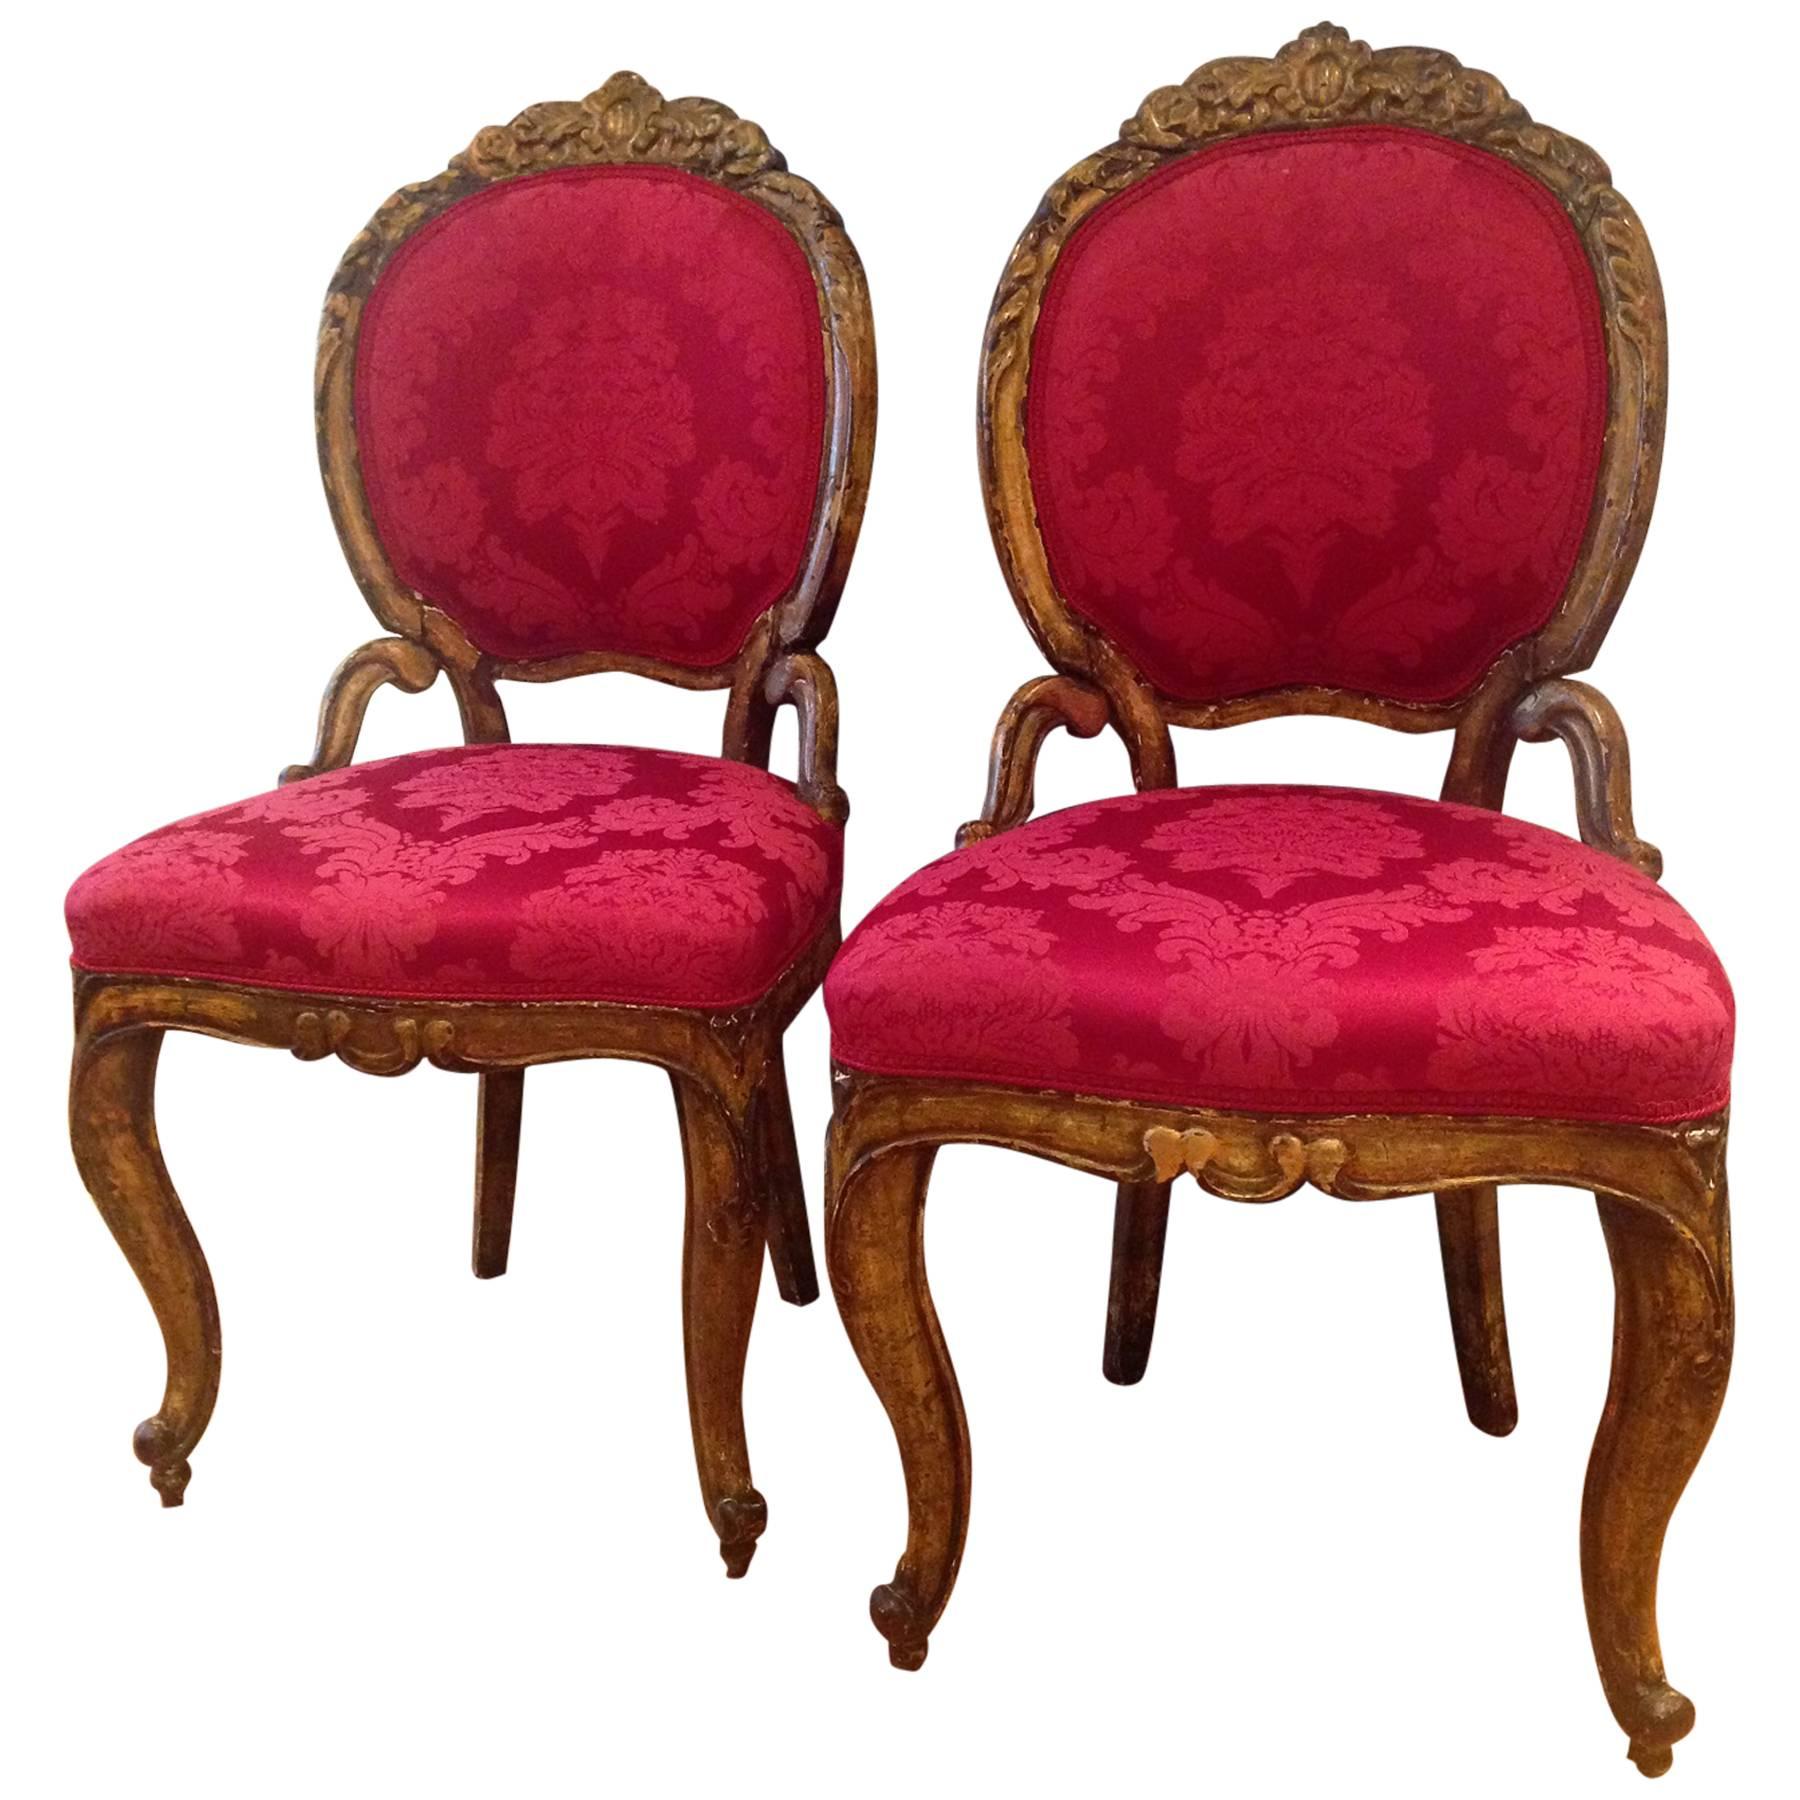 Pair of 18th Century Italian Baroque Giltwood Chairs Upholstered in Damask For Sale